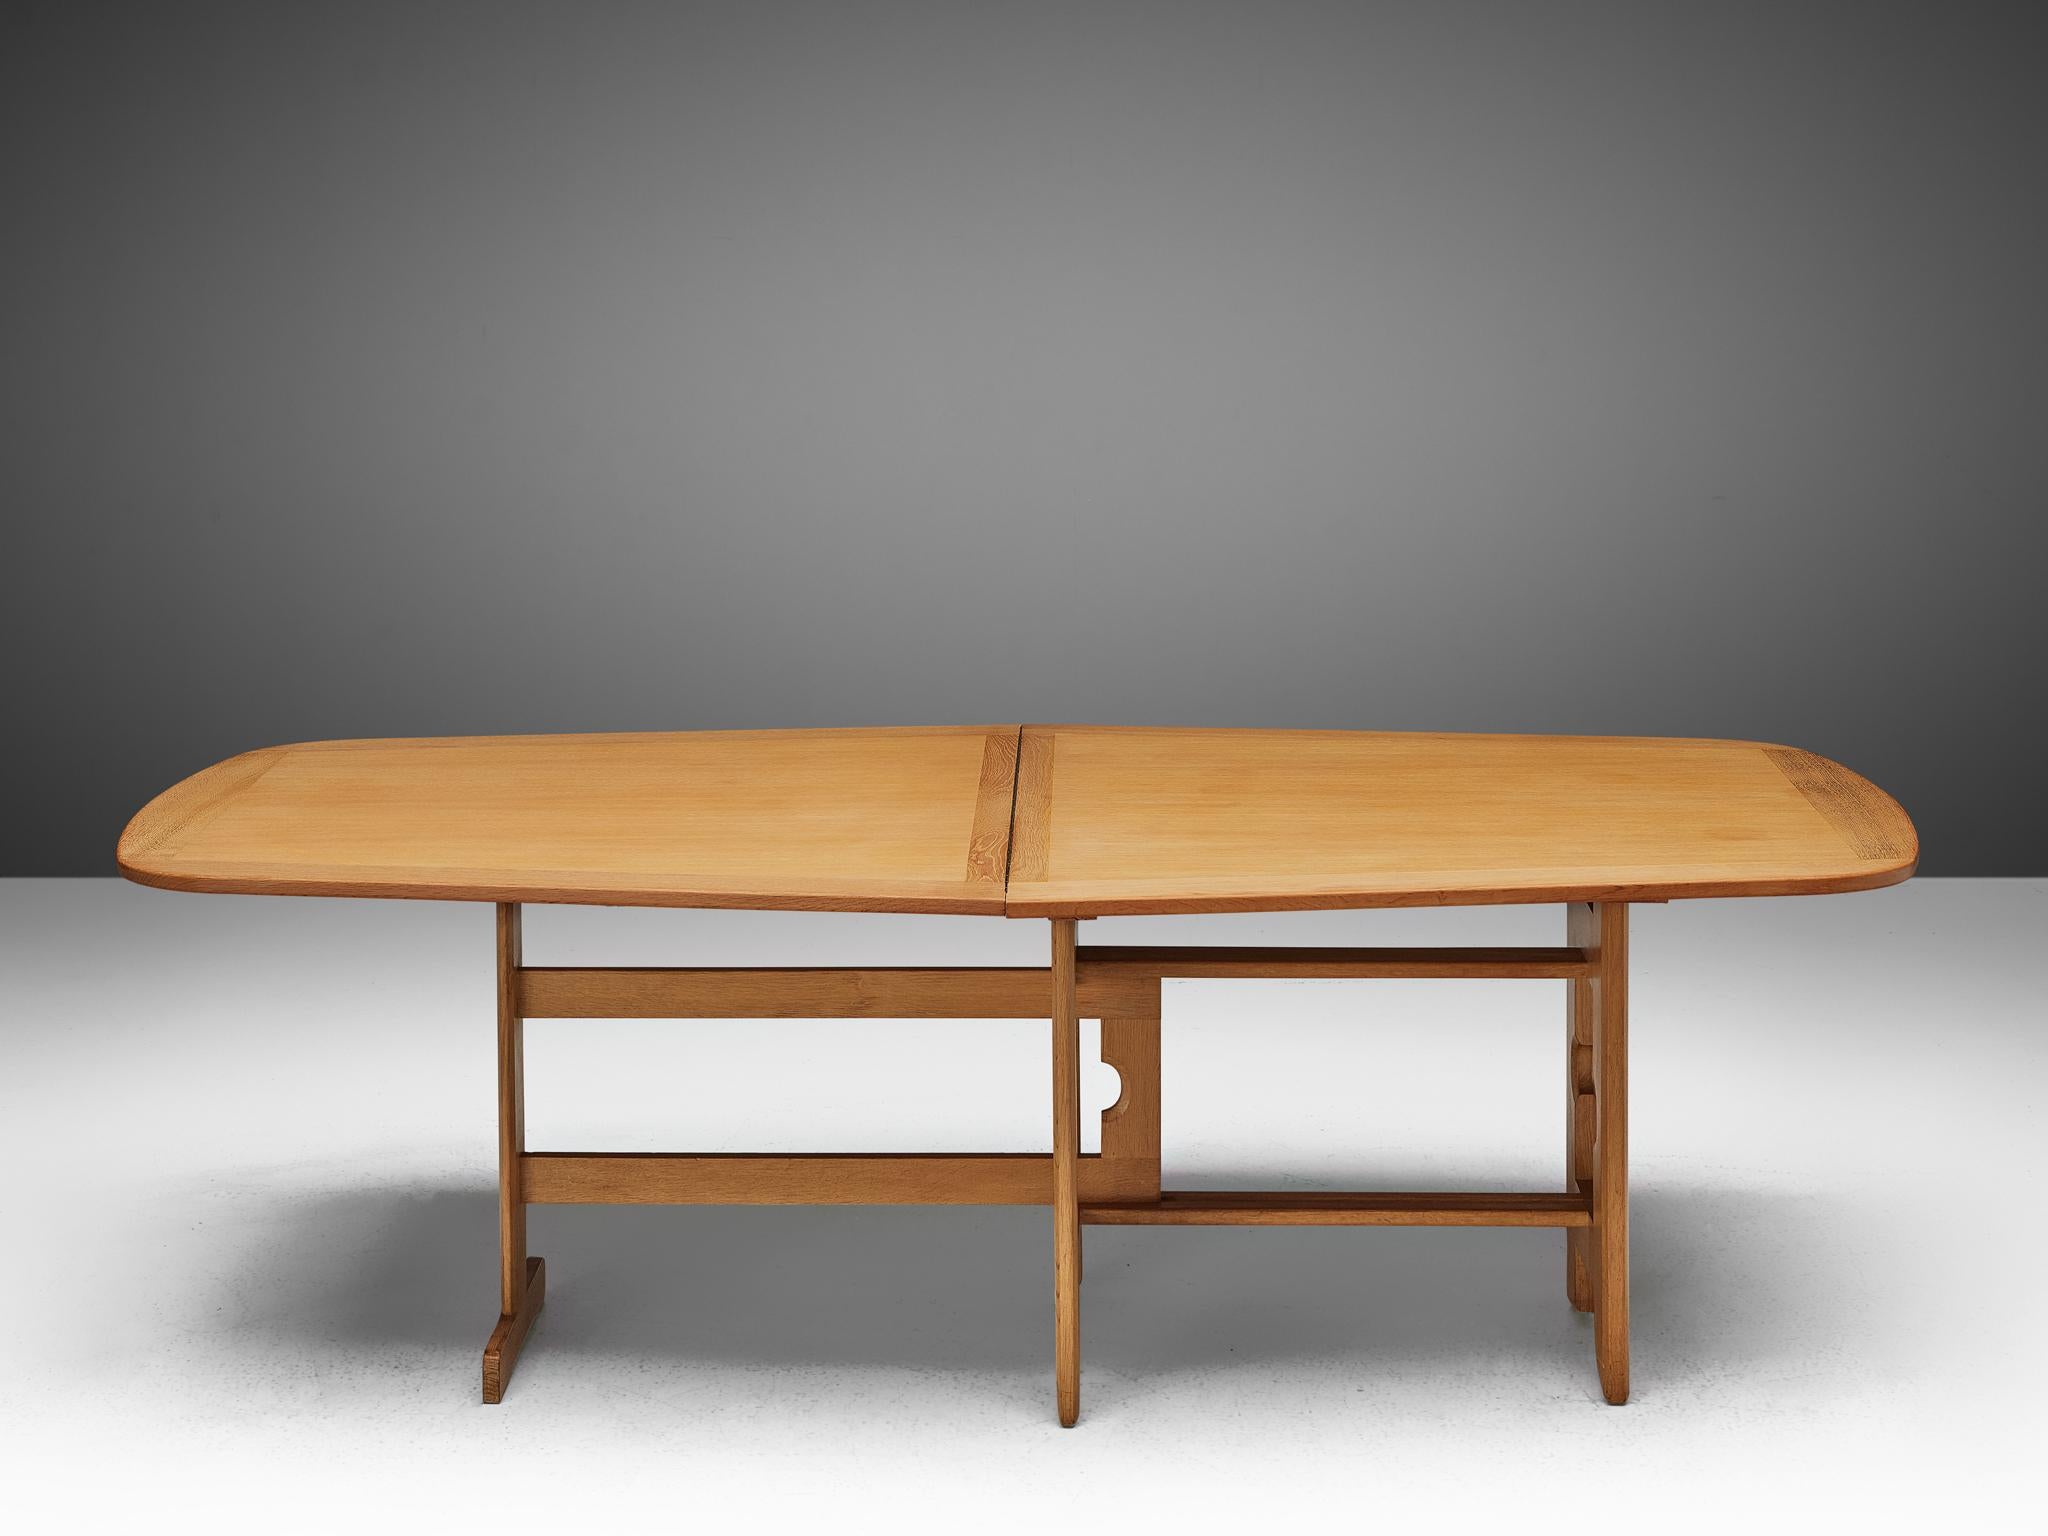 Guillerme et Chambron, extendable dining table, oak, 1960s.

Freeform shaped dining table with inlayed top. This extendable table in solid oak comes with a fold out leaf, which makes it a very versatile item. The sculptural three legged base has